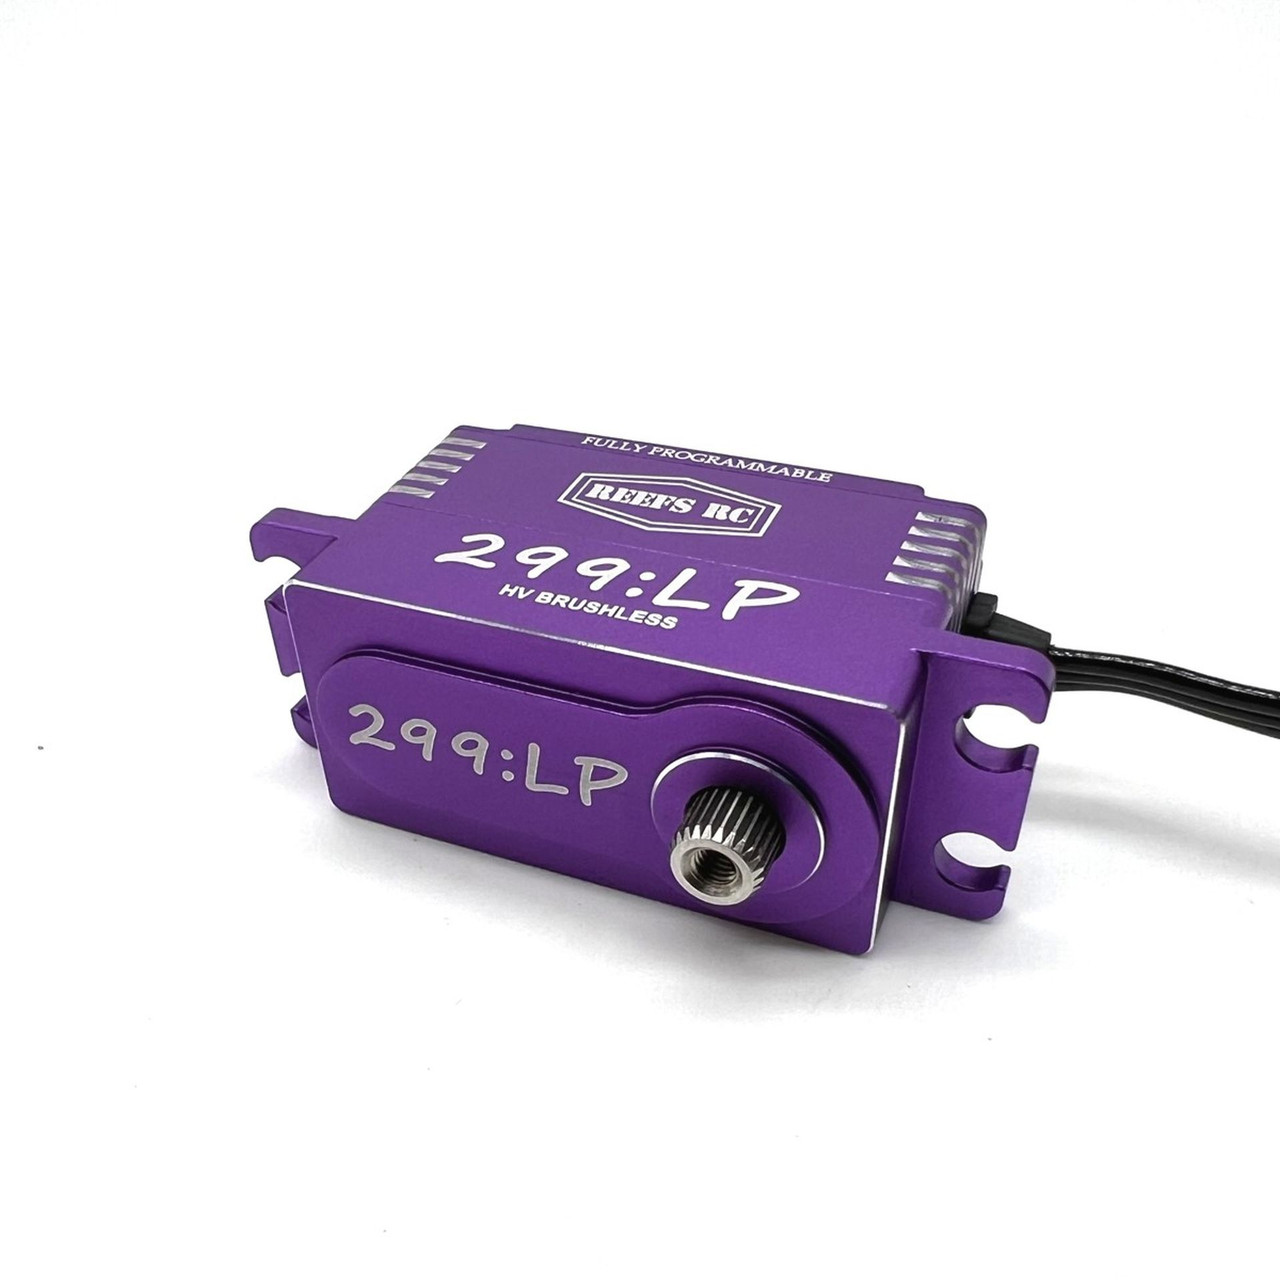 REEFS 299LP Special Edition Purple High Speed High Torque Low Profile Brushless Servo .0.57/313 @ 8.4V SEHREEFS145